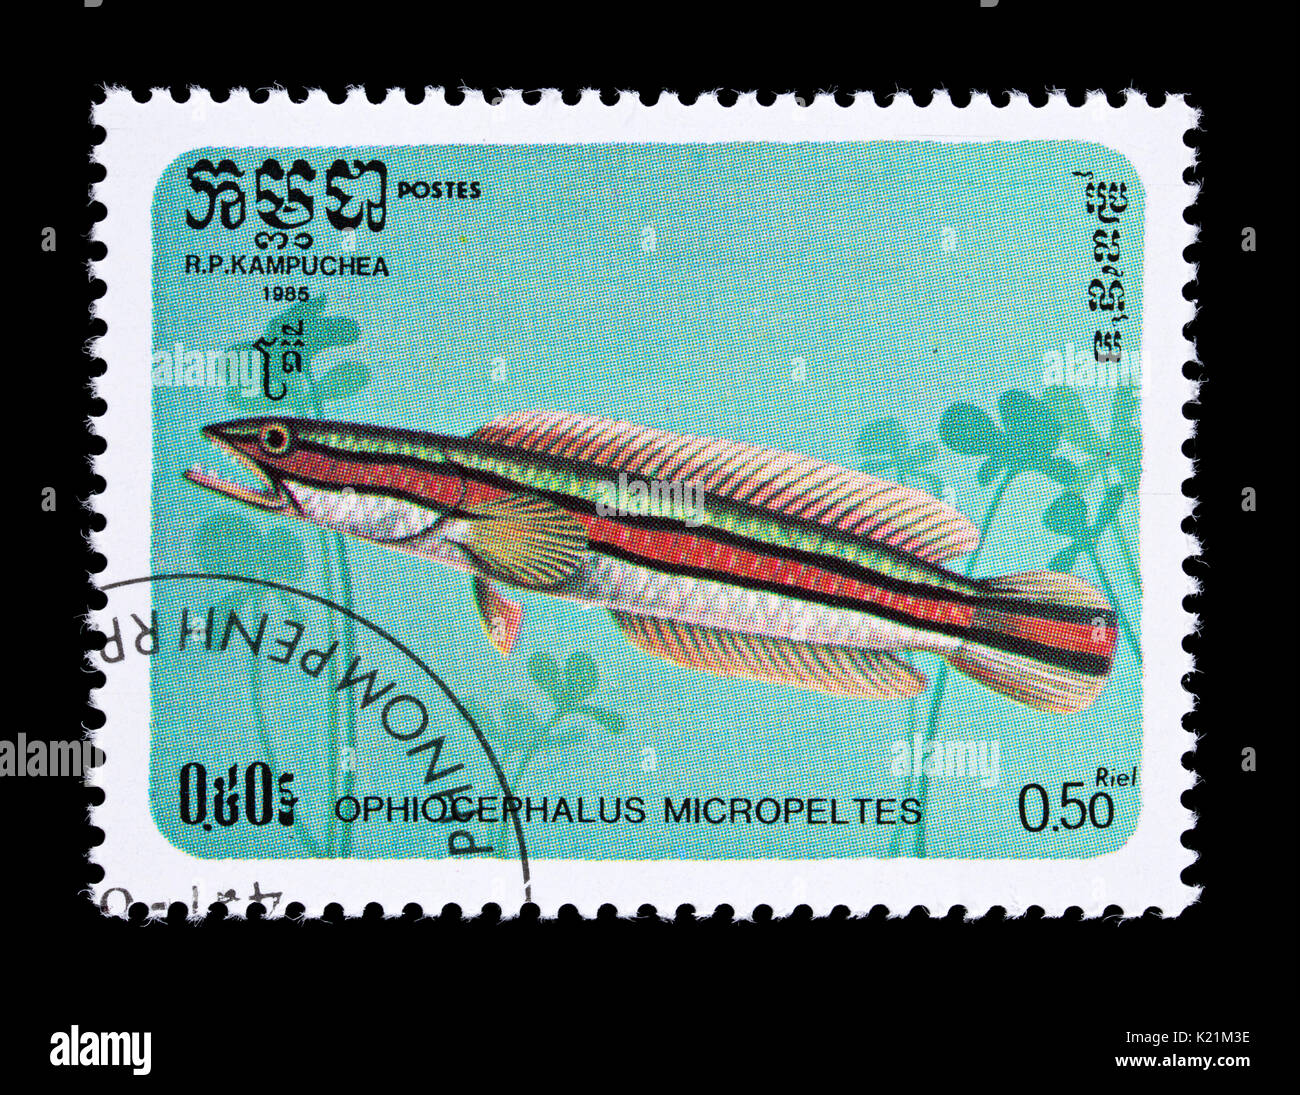 Postage stamp from Cambodia (Kampuchea) depicting a giant snakehead or giant mudfish (Channa micropeltes) Stock Photo